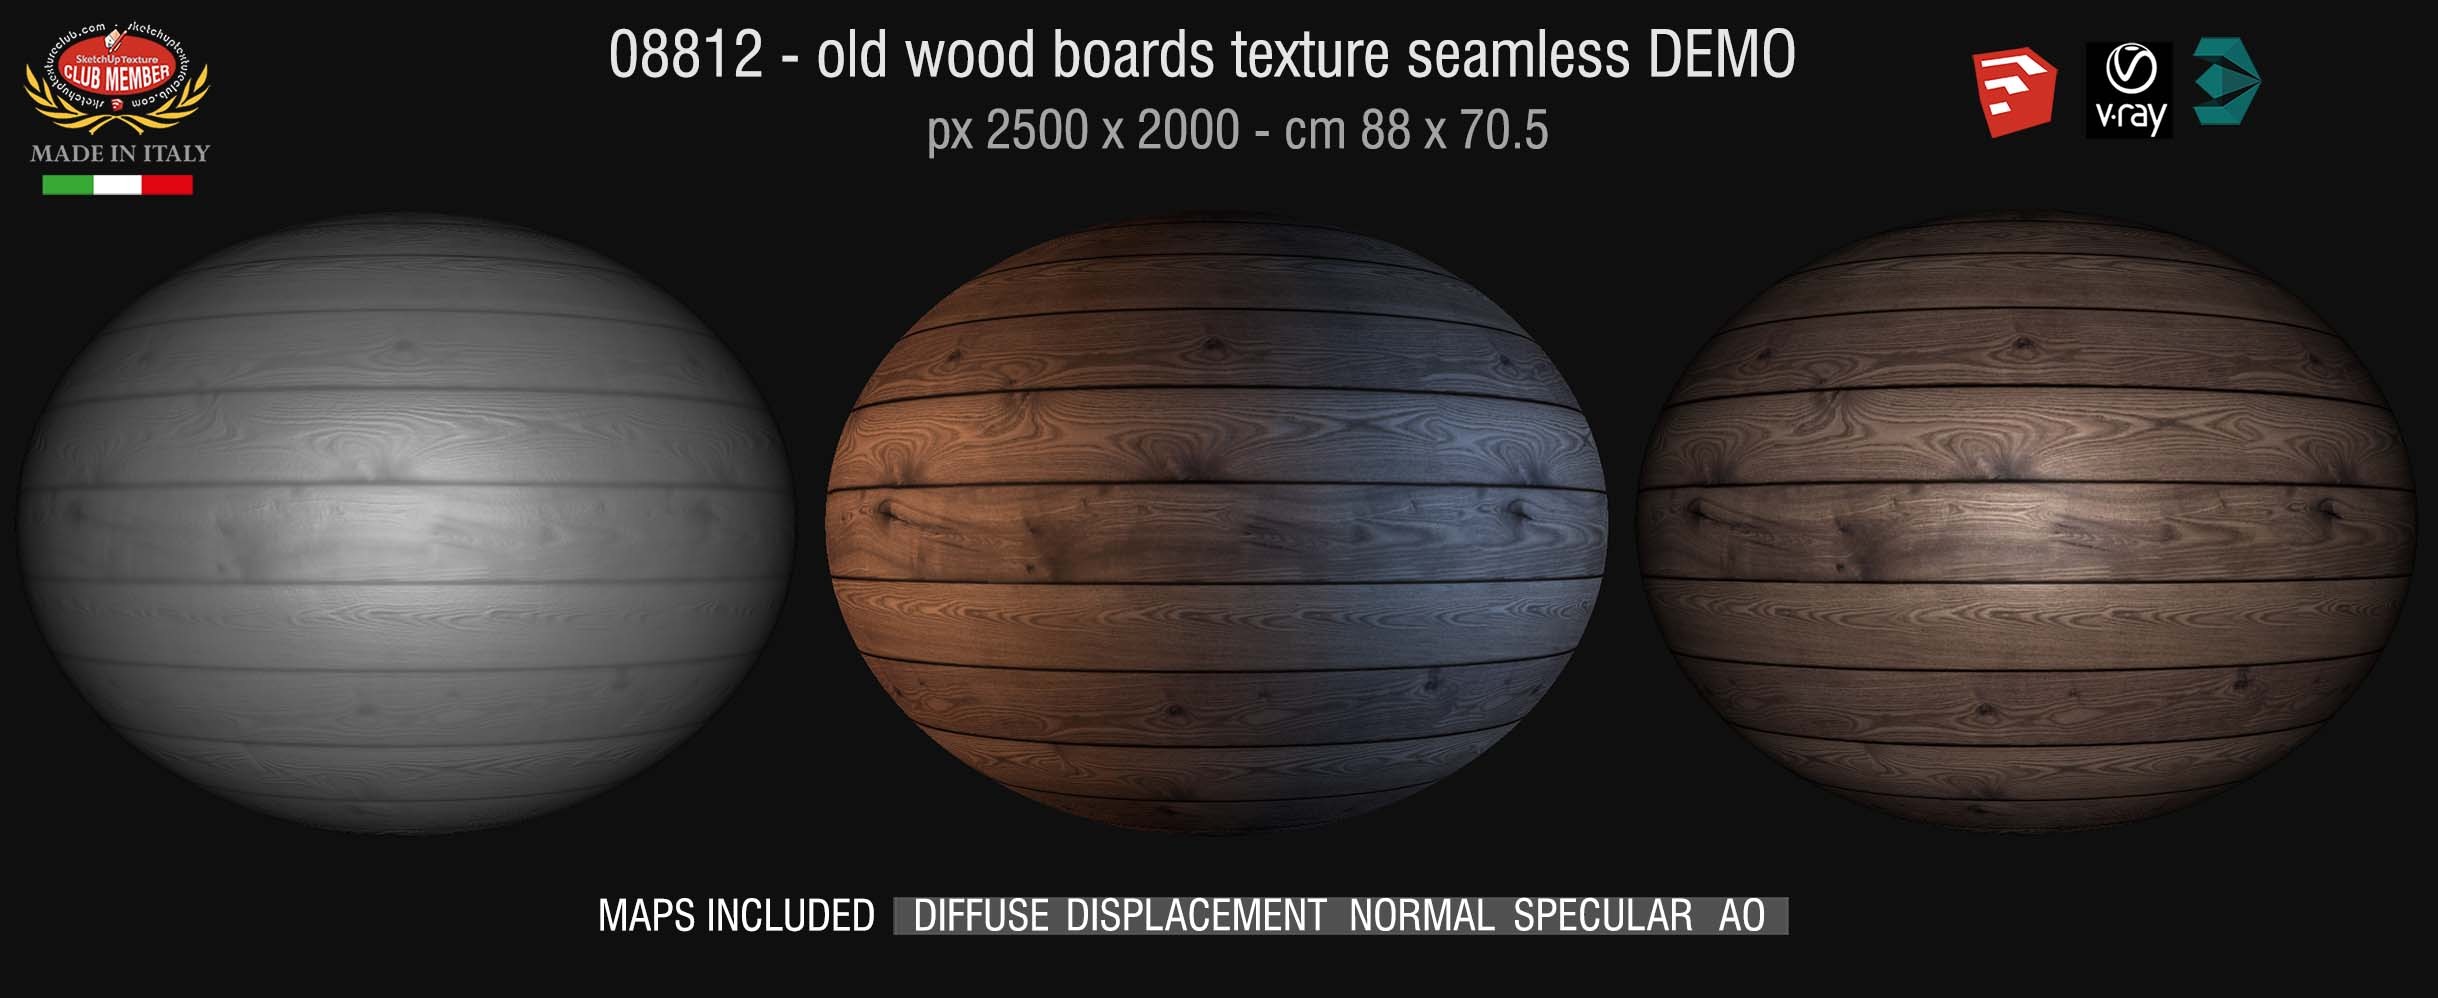 08812 - HR Old wood boards texture seamless + maps DEMO